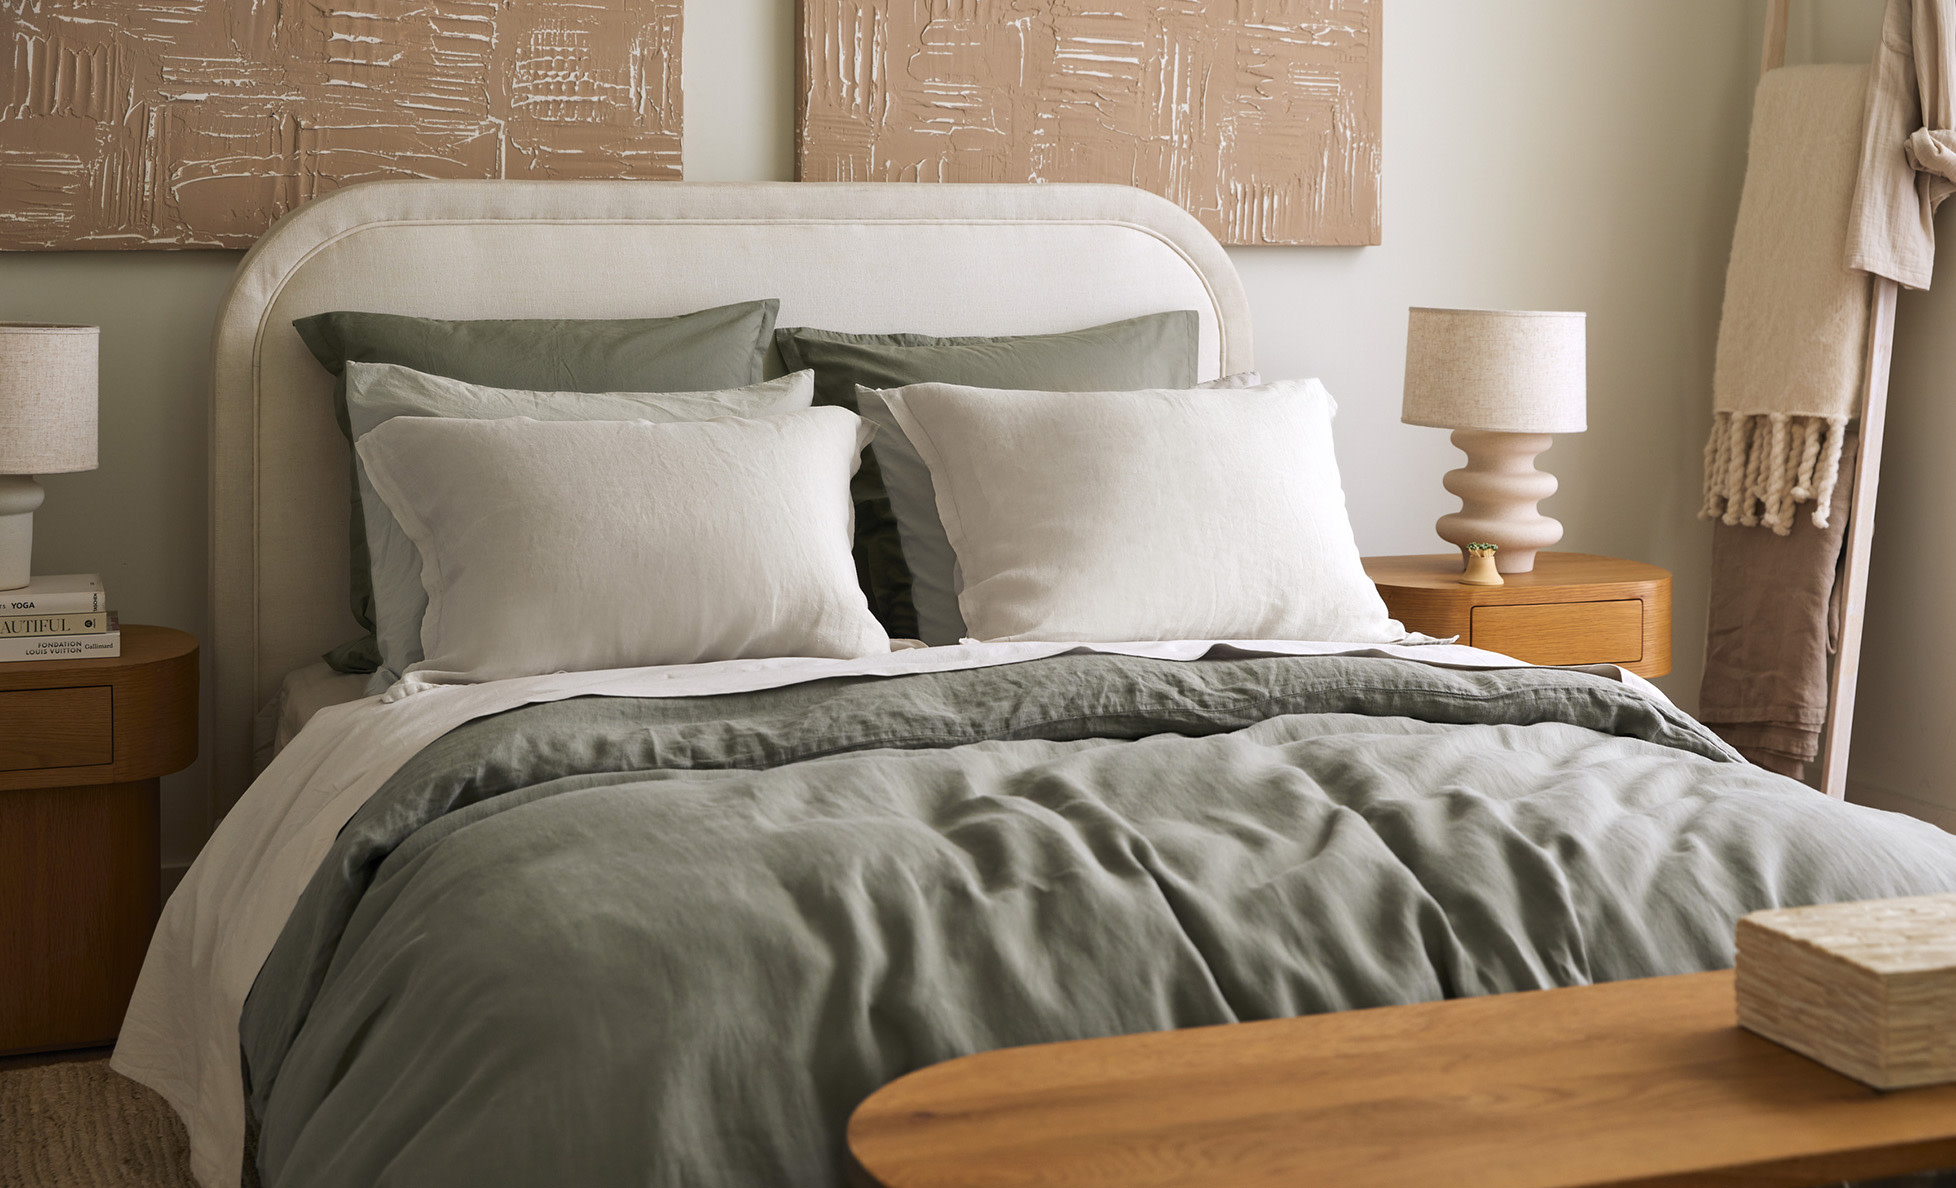 Neatly made bed with light green and taupe linen sheets